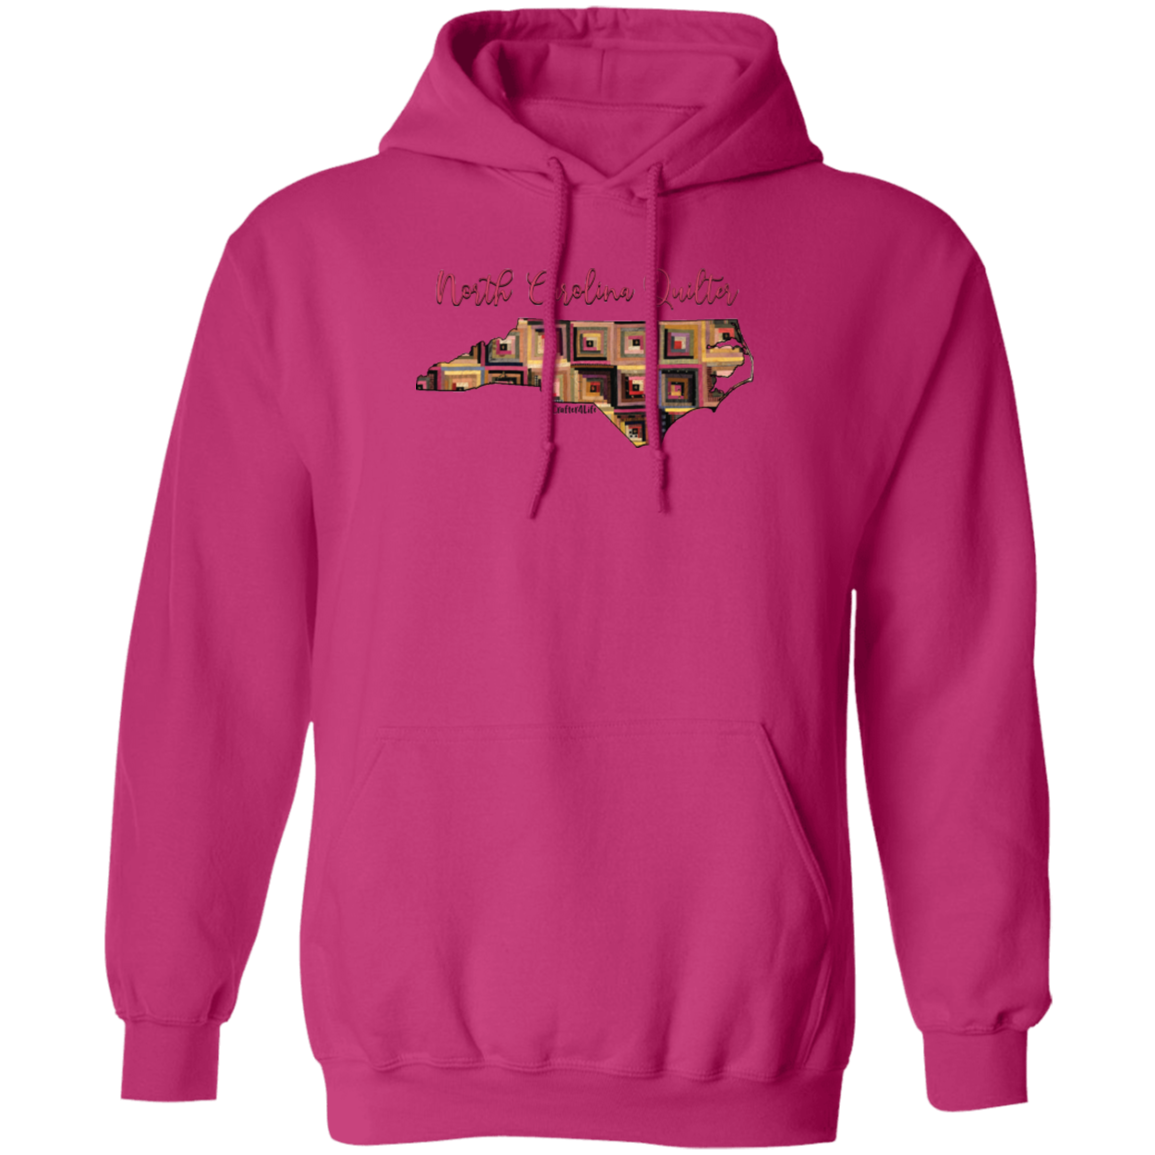 North Carolina Quilter Pullover Hoodie, Gift for Quilting Friends and Family